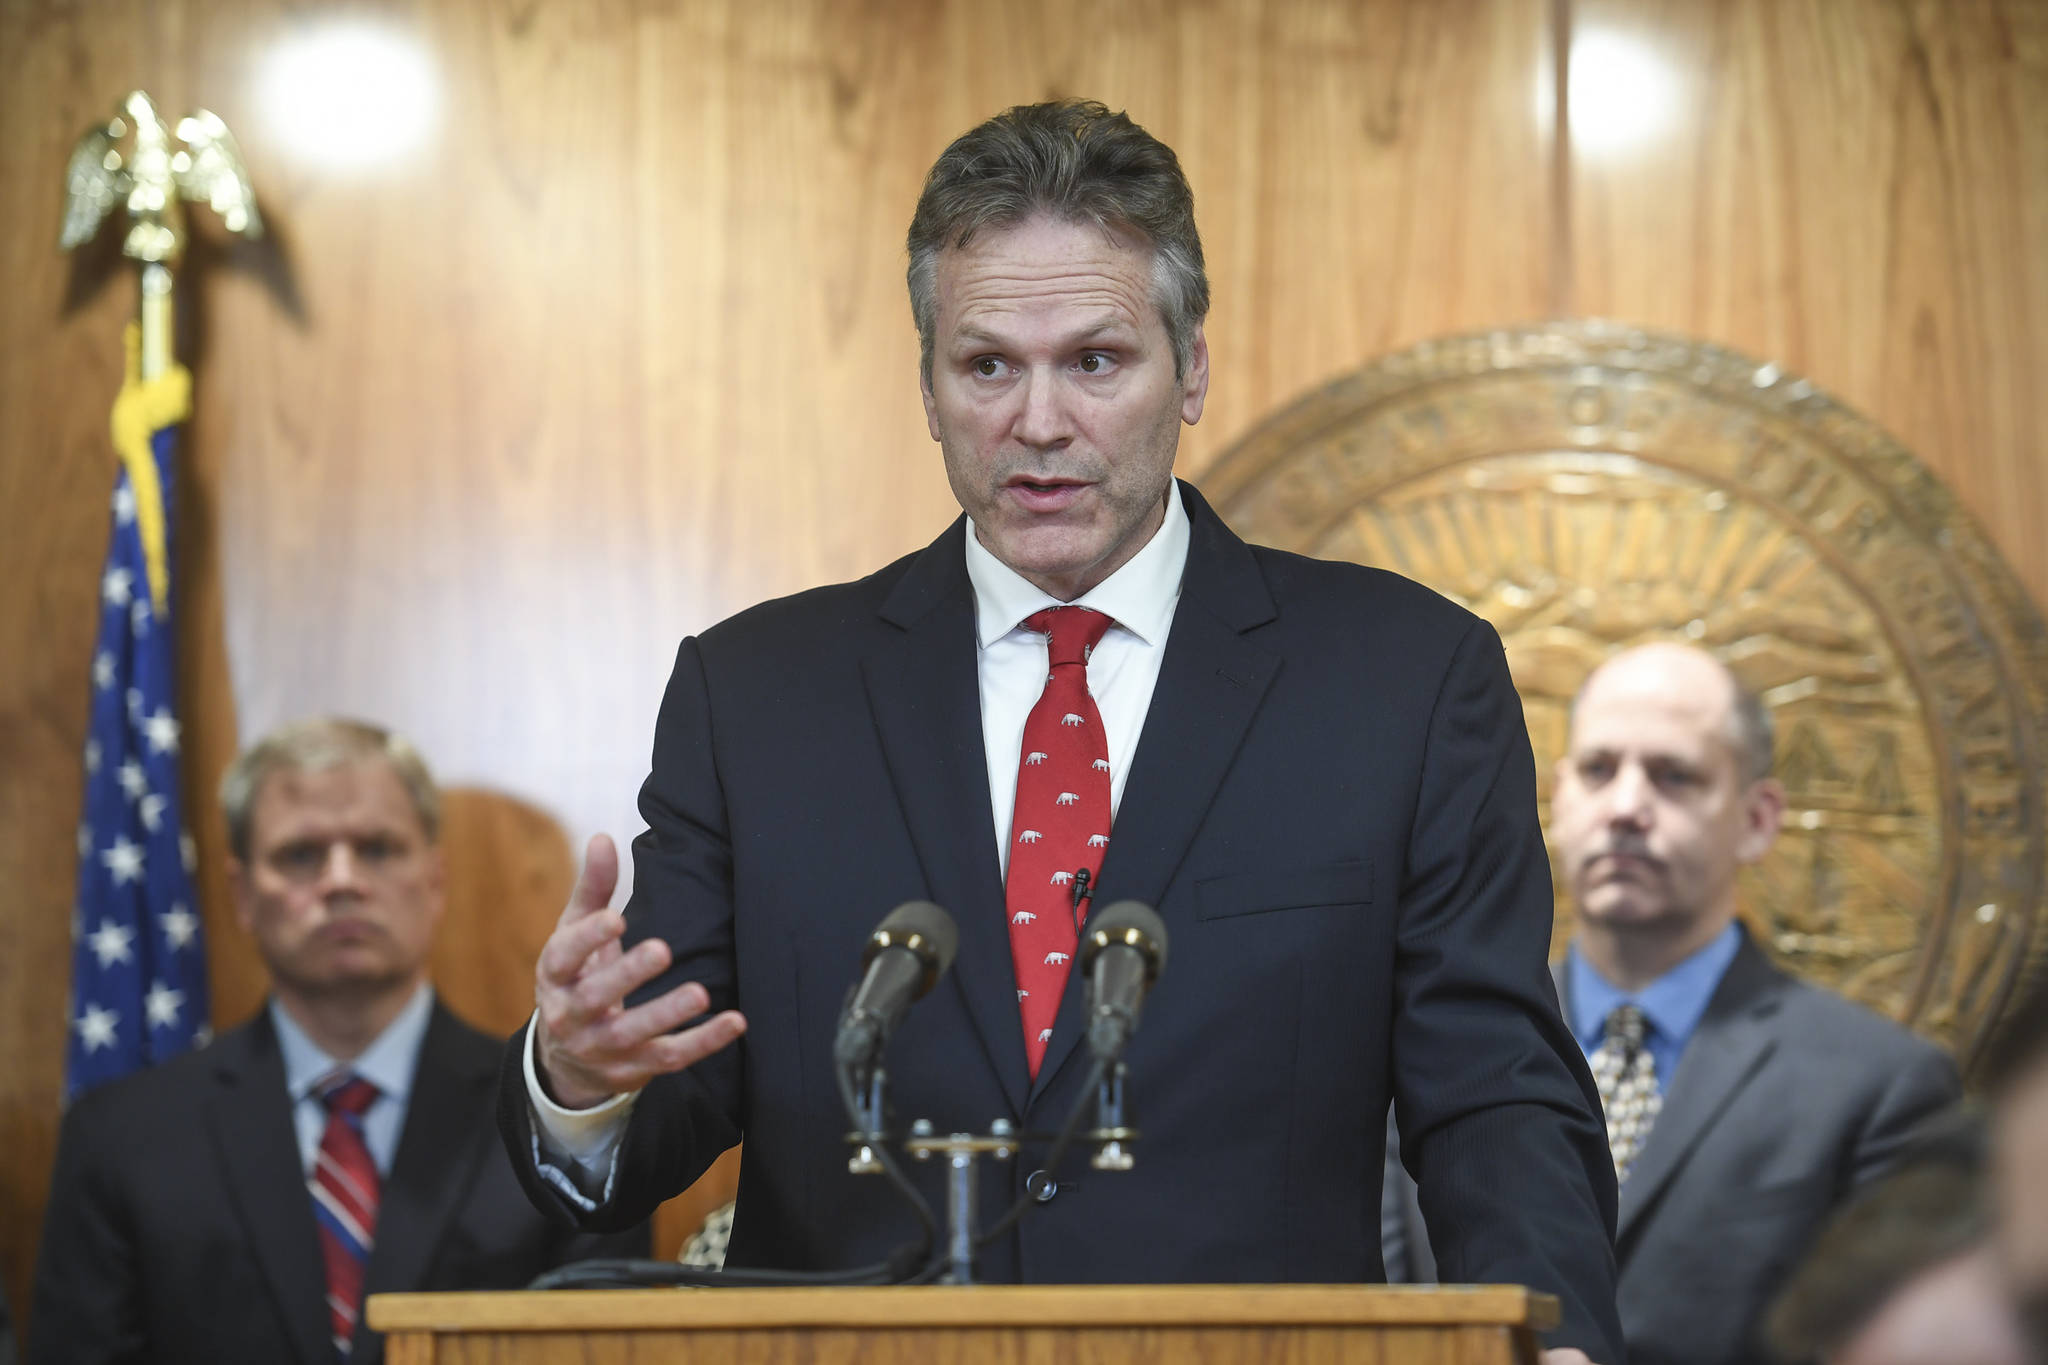 Gov. Mike Dunleavy announces his state budget during a press conference at the Capitol on Wednesday, Dec. 11, 2019. (Michael Penn | Juneau Empire File)